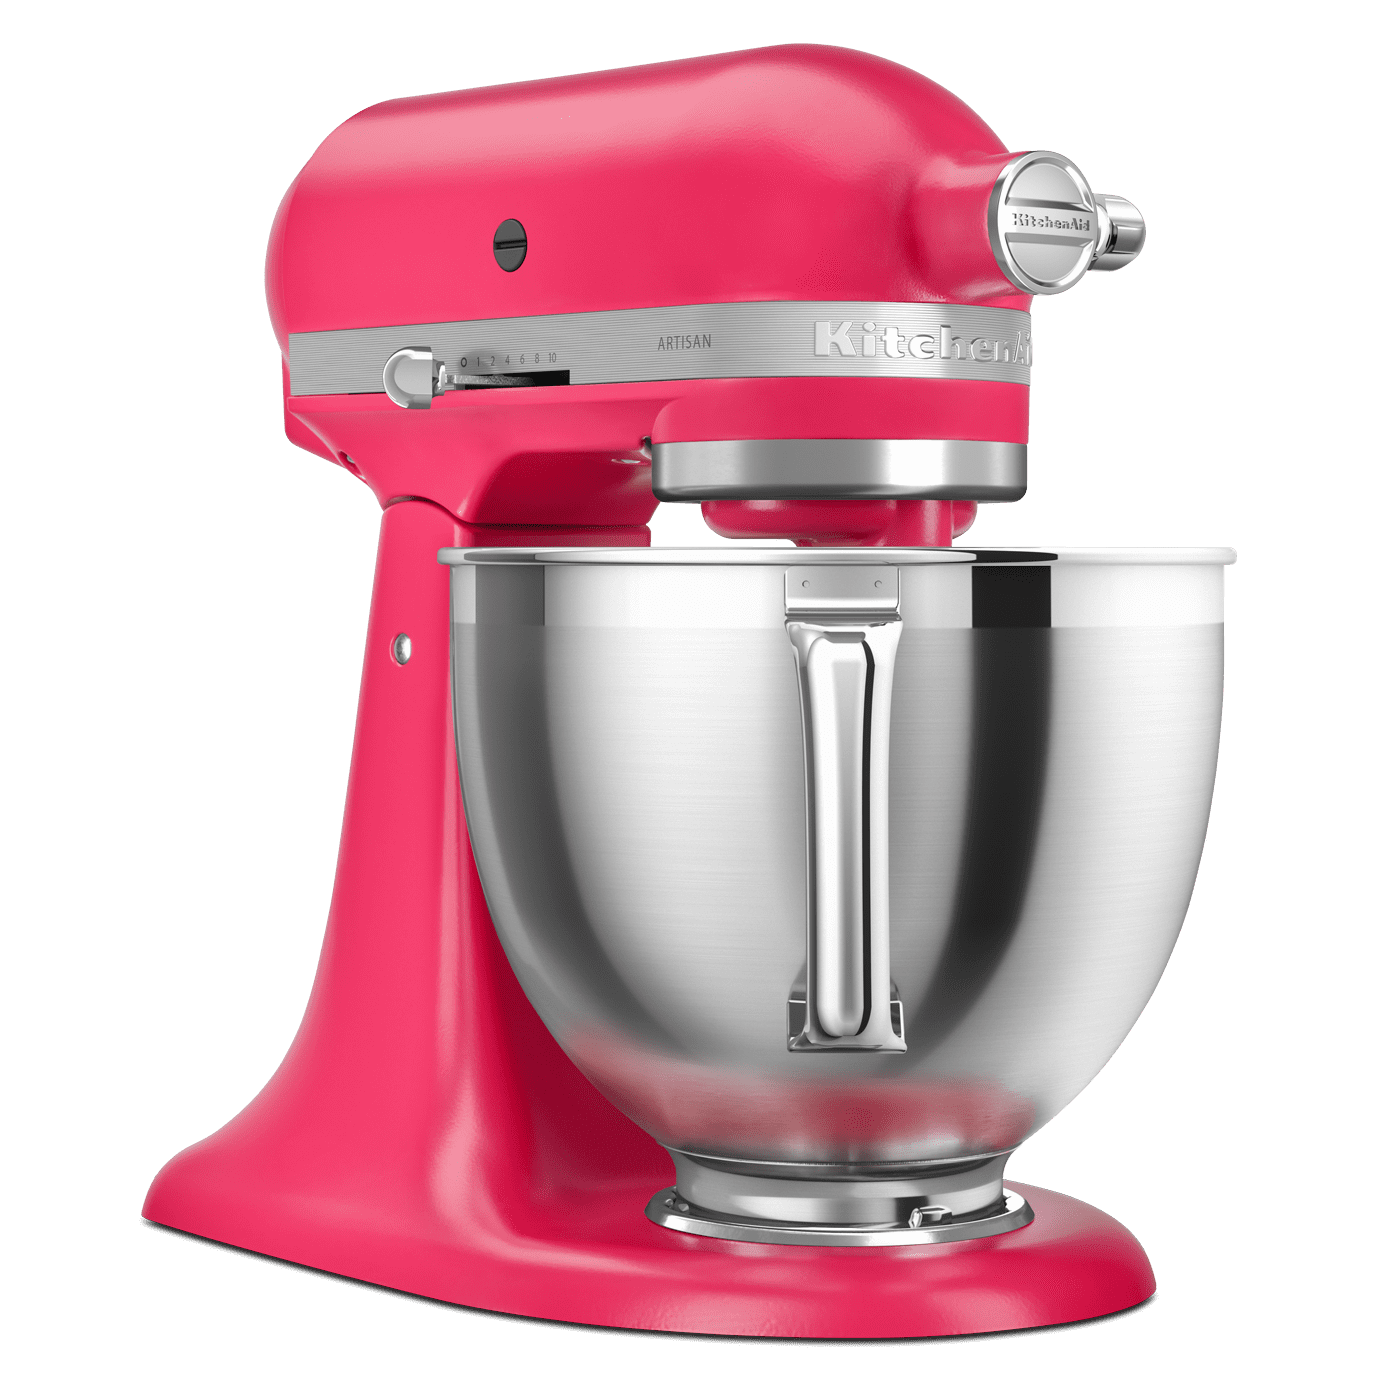 KITCHENAID® ANNOUNCES HIBISCUS AS 2023 COLOR OF THE YEAR, MADE TO ATTRACT  MAKERS